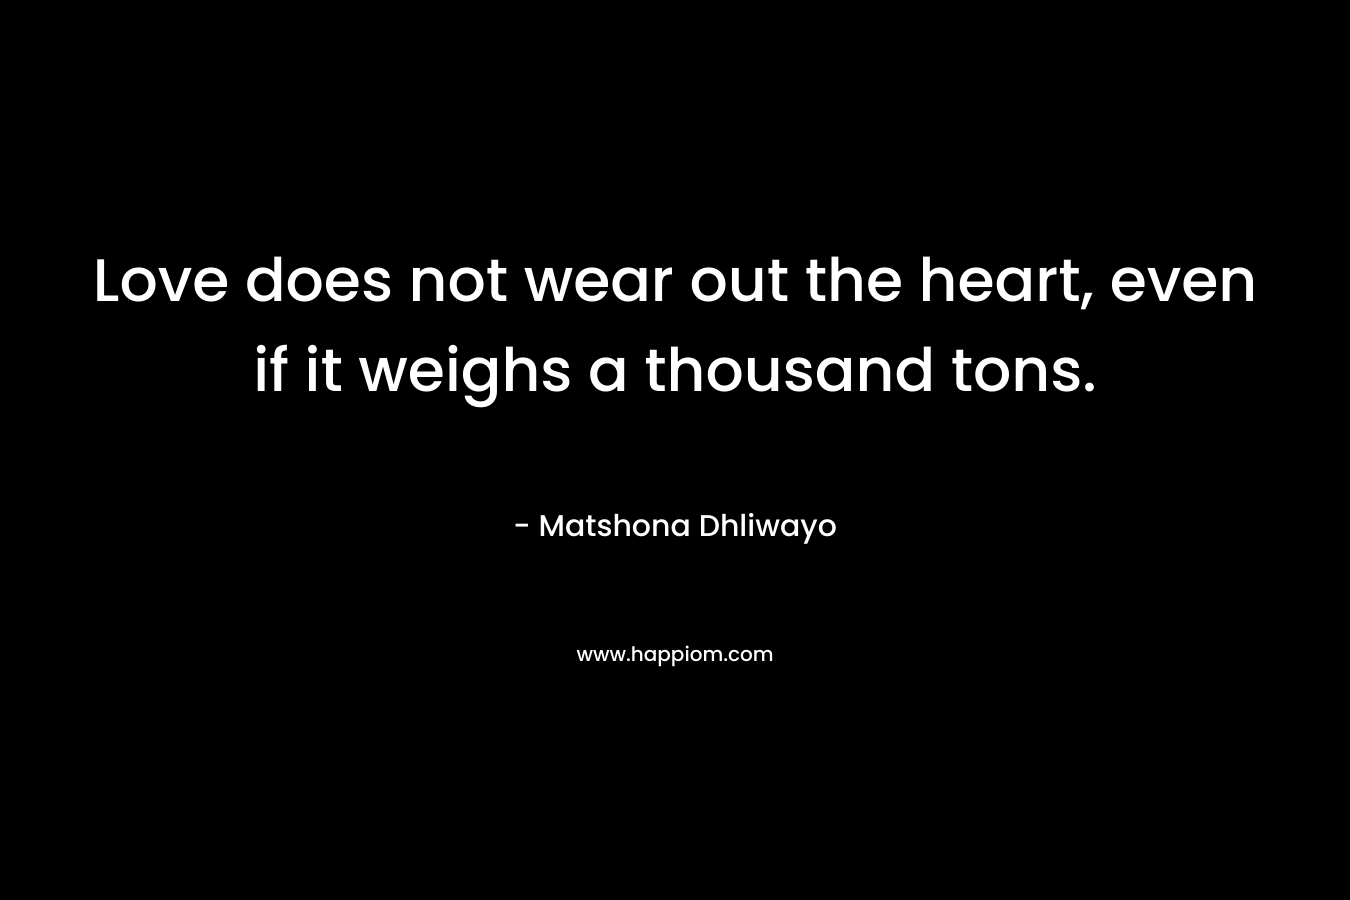 Love does not wear out the heart, even if it weighs a thousand tons.